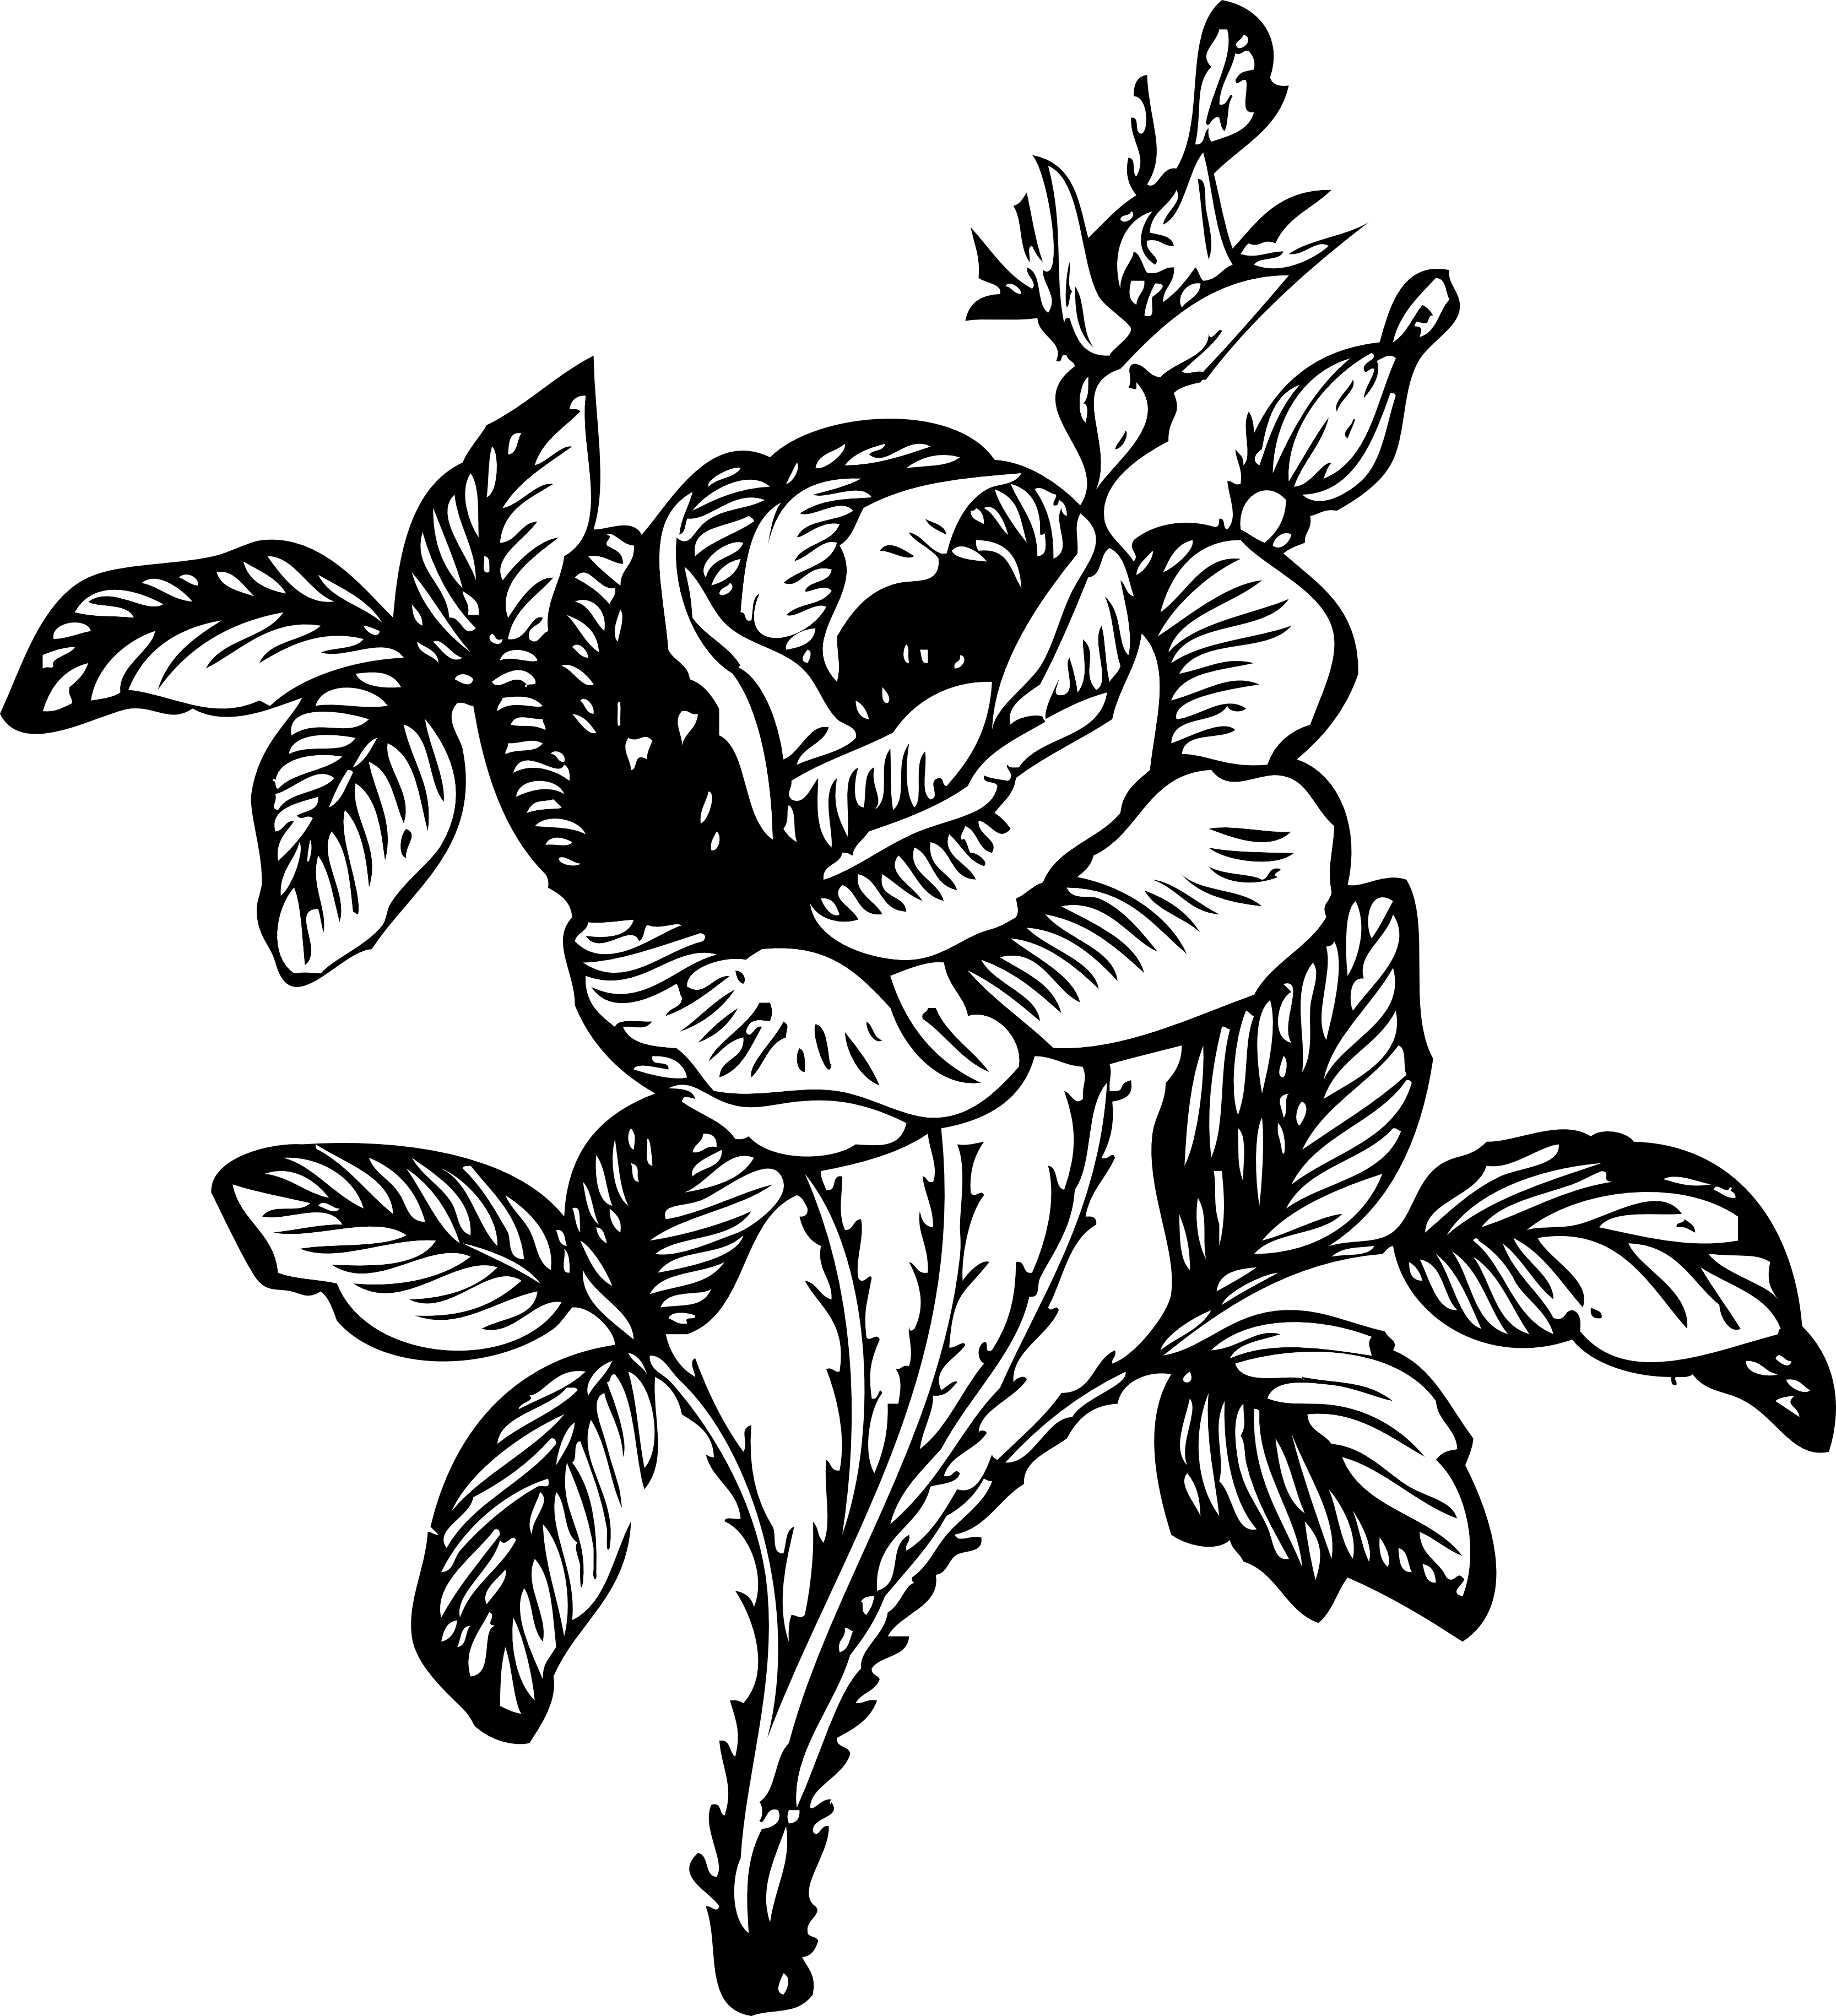 Free Black And White Rose Drawings, Download Free Clip Art.